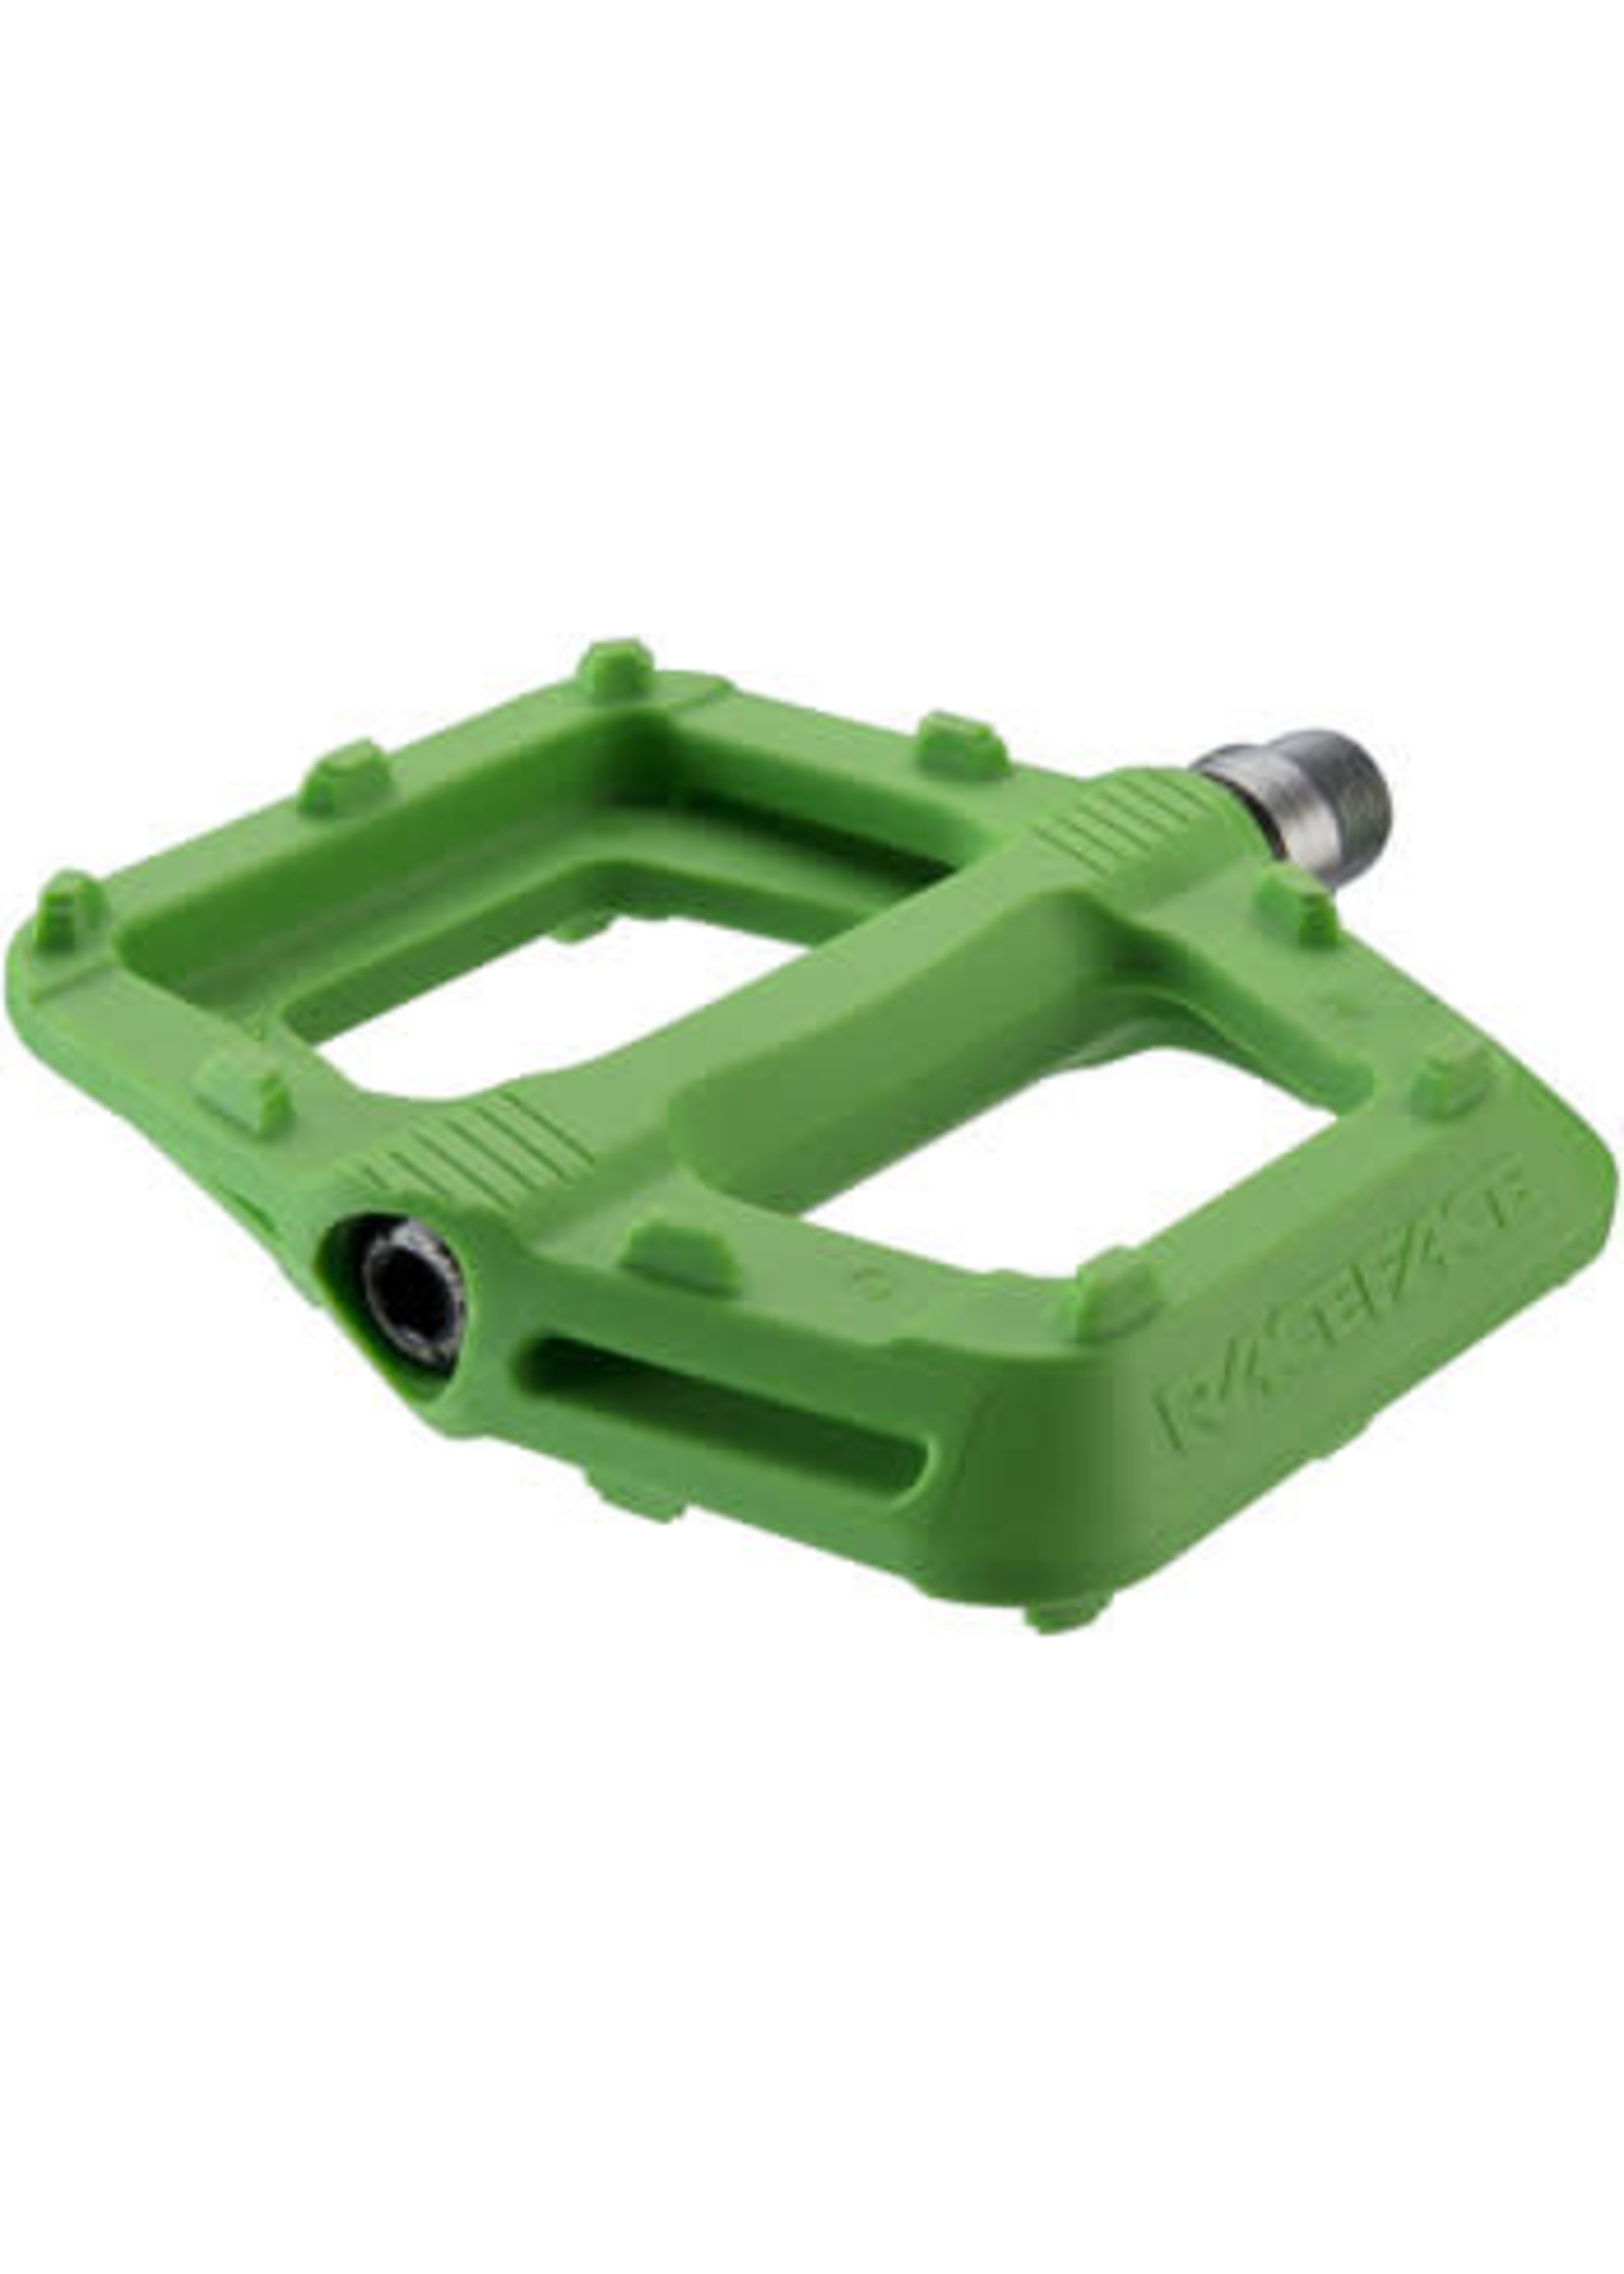 Raceface Ride, Platform Pedals, Body: Nylon, Spindle: Cr-Mo, 9/16'', Green, Pair